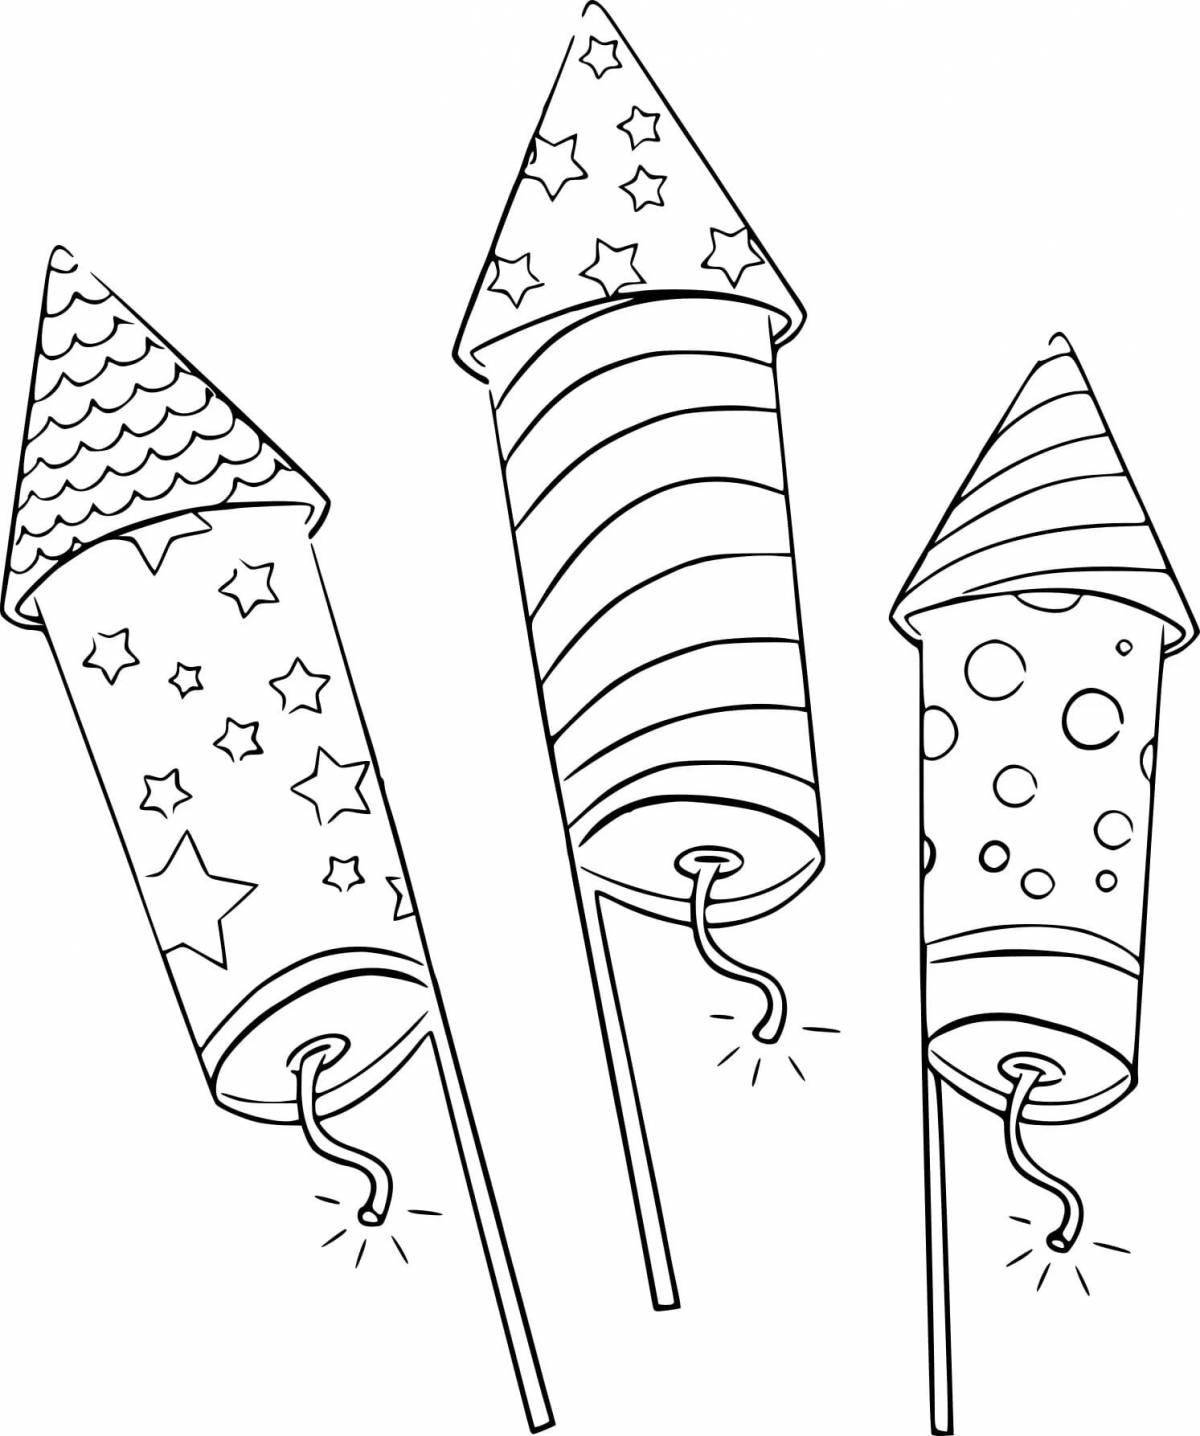 Luxury fireworks coloring book